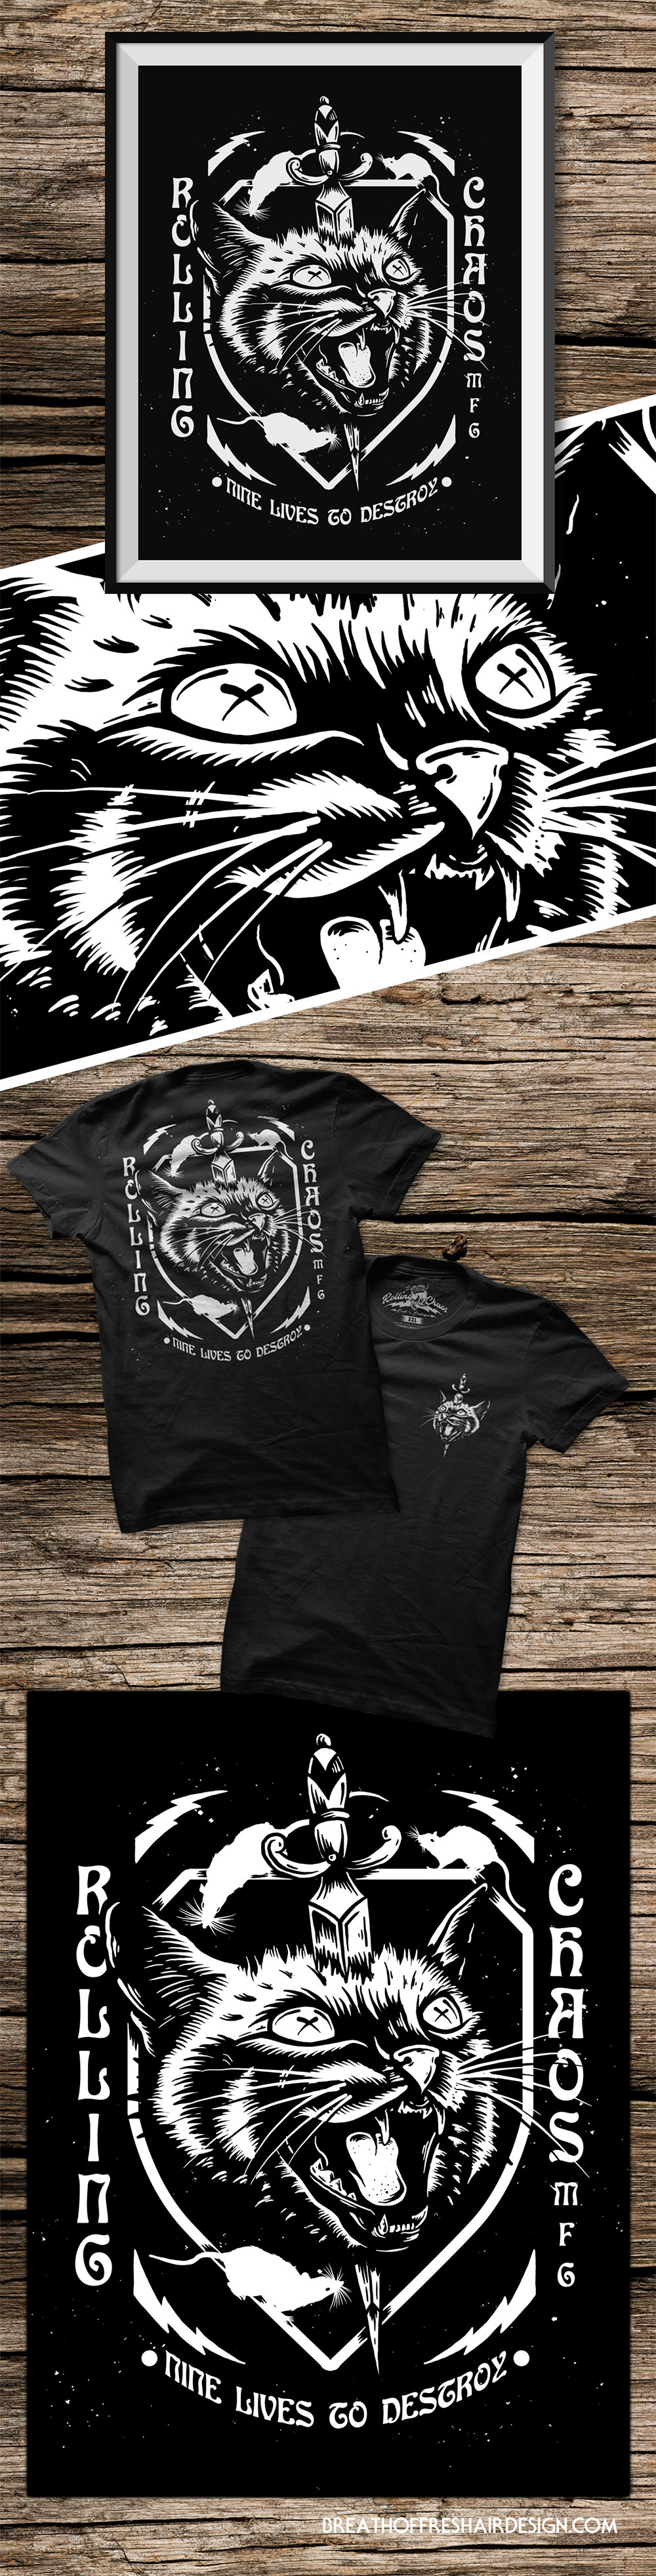 Cat Rats Rolling Chaos motorcycle choppers nine lives crest Toronto clothing brand rat